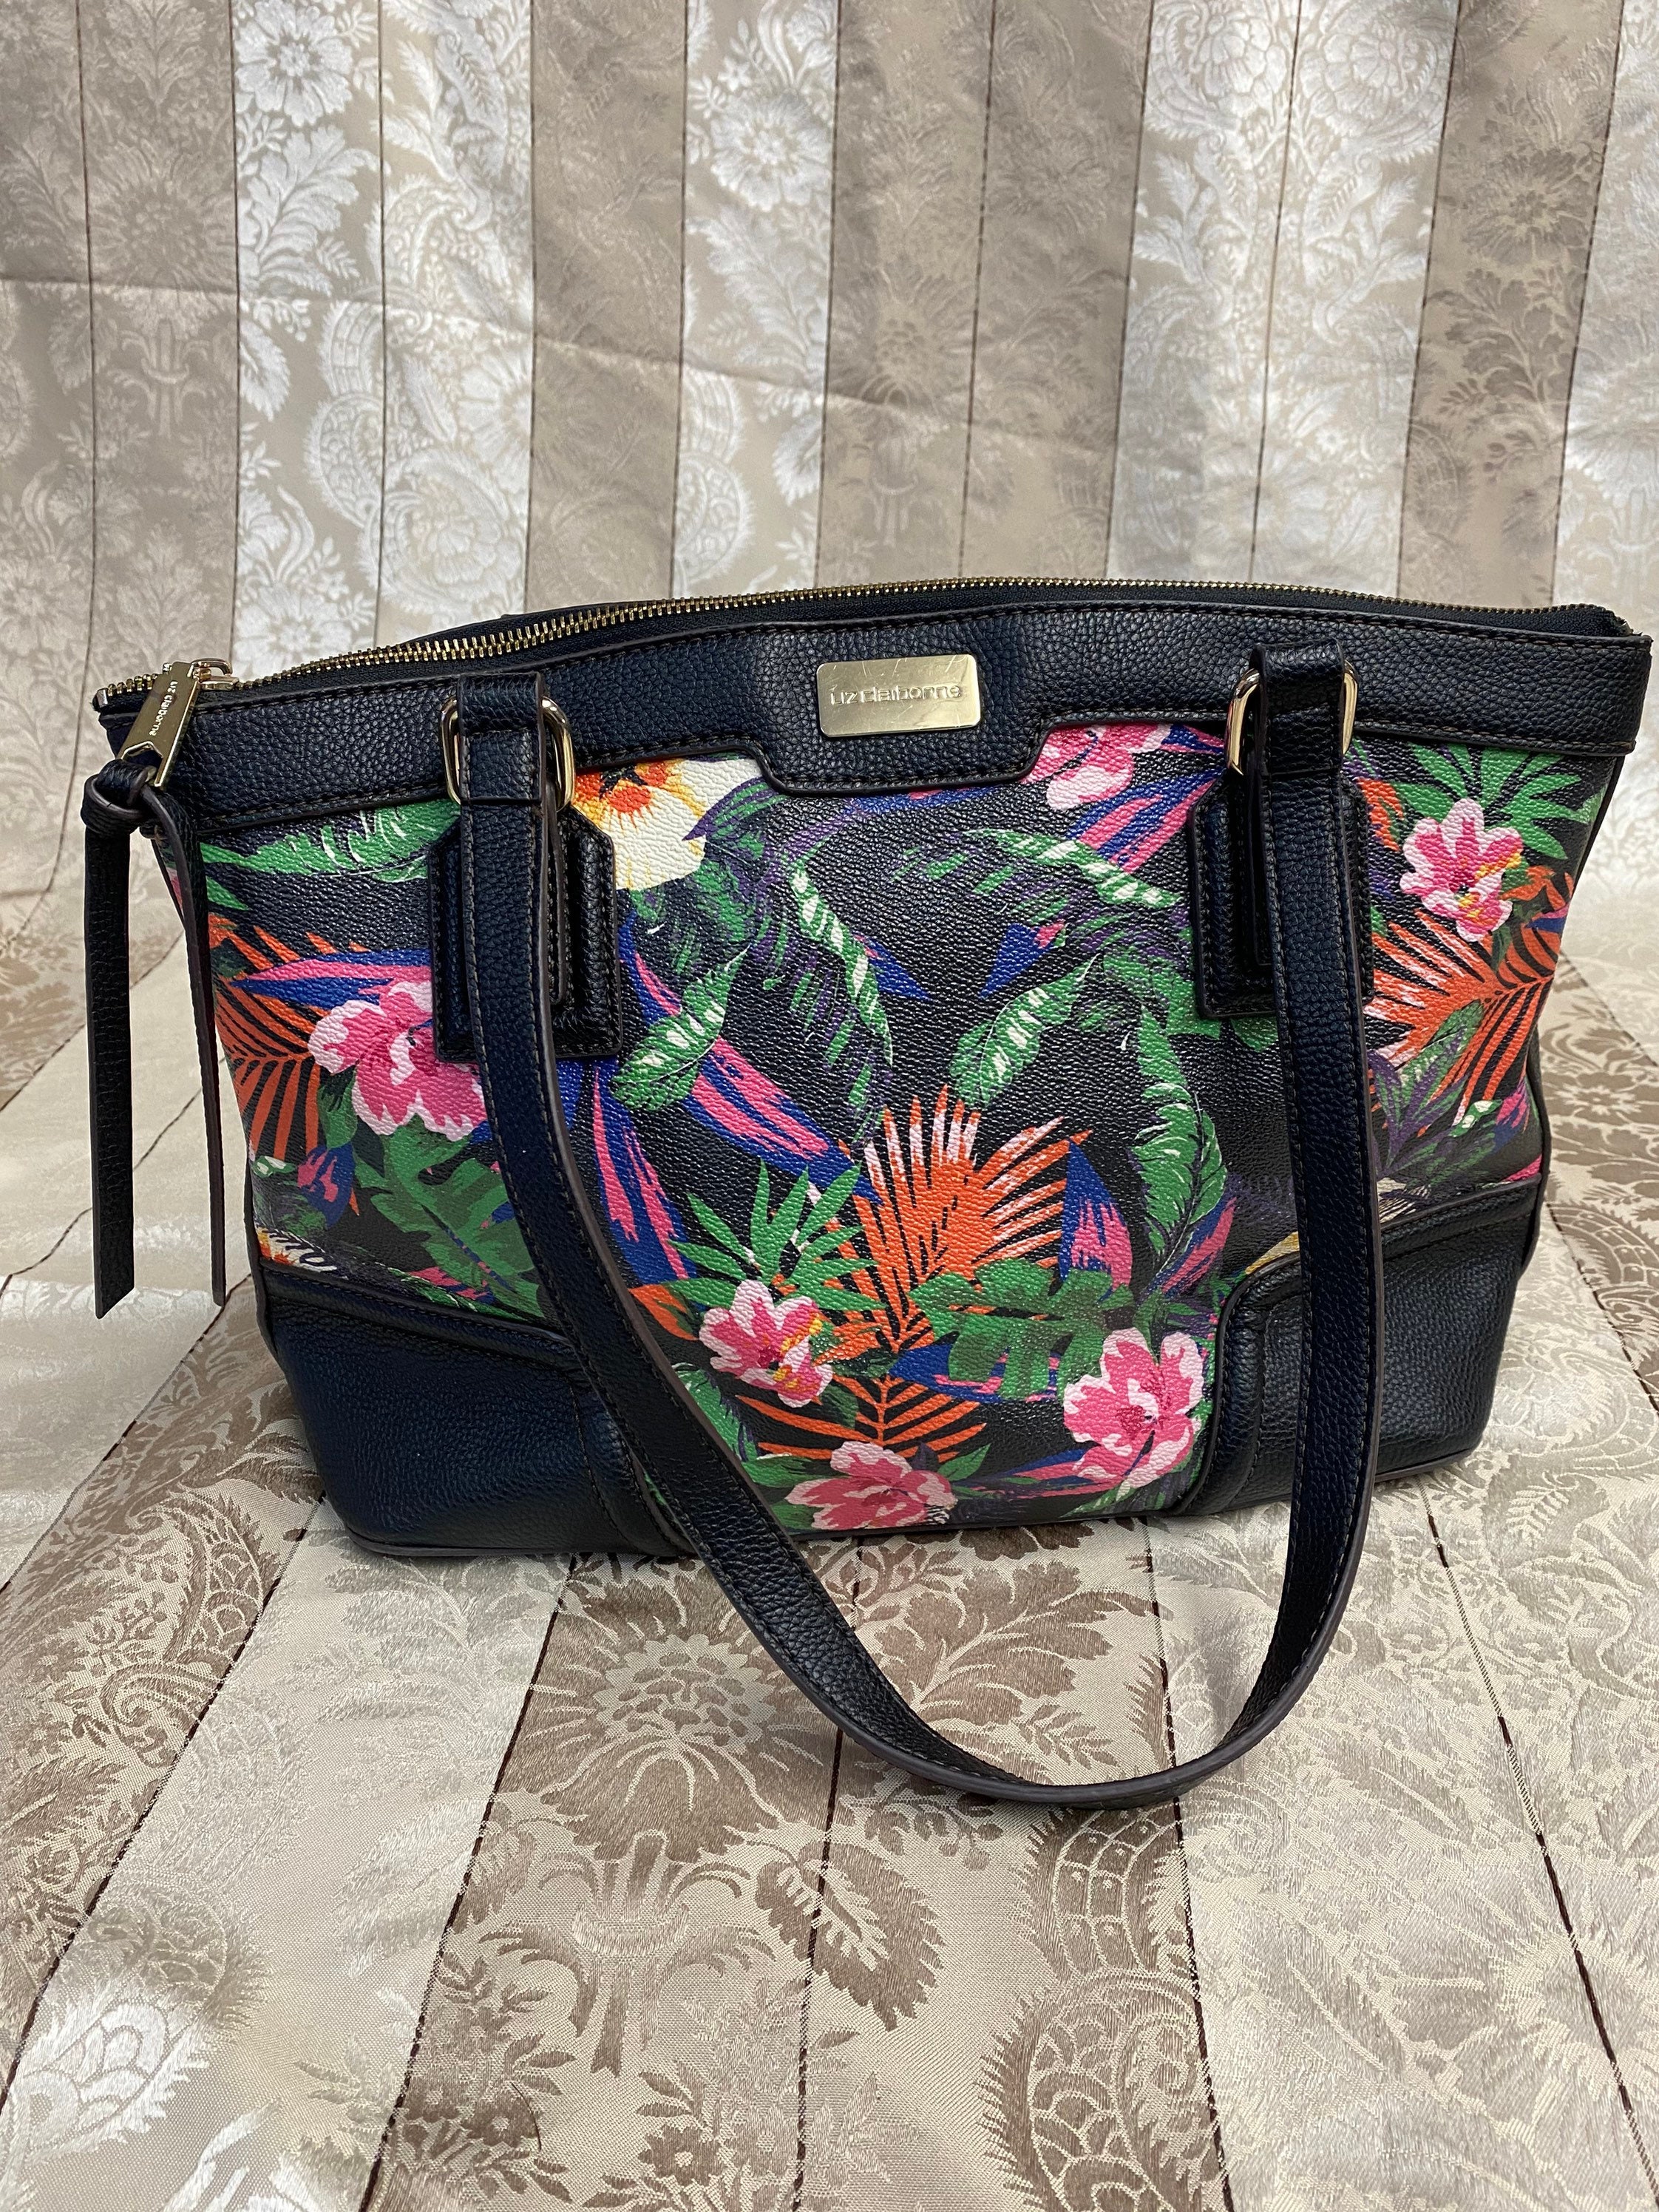 LC Bags & Handbags for Women for sale